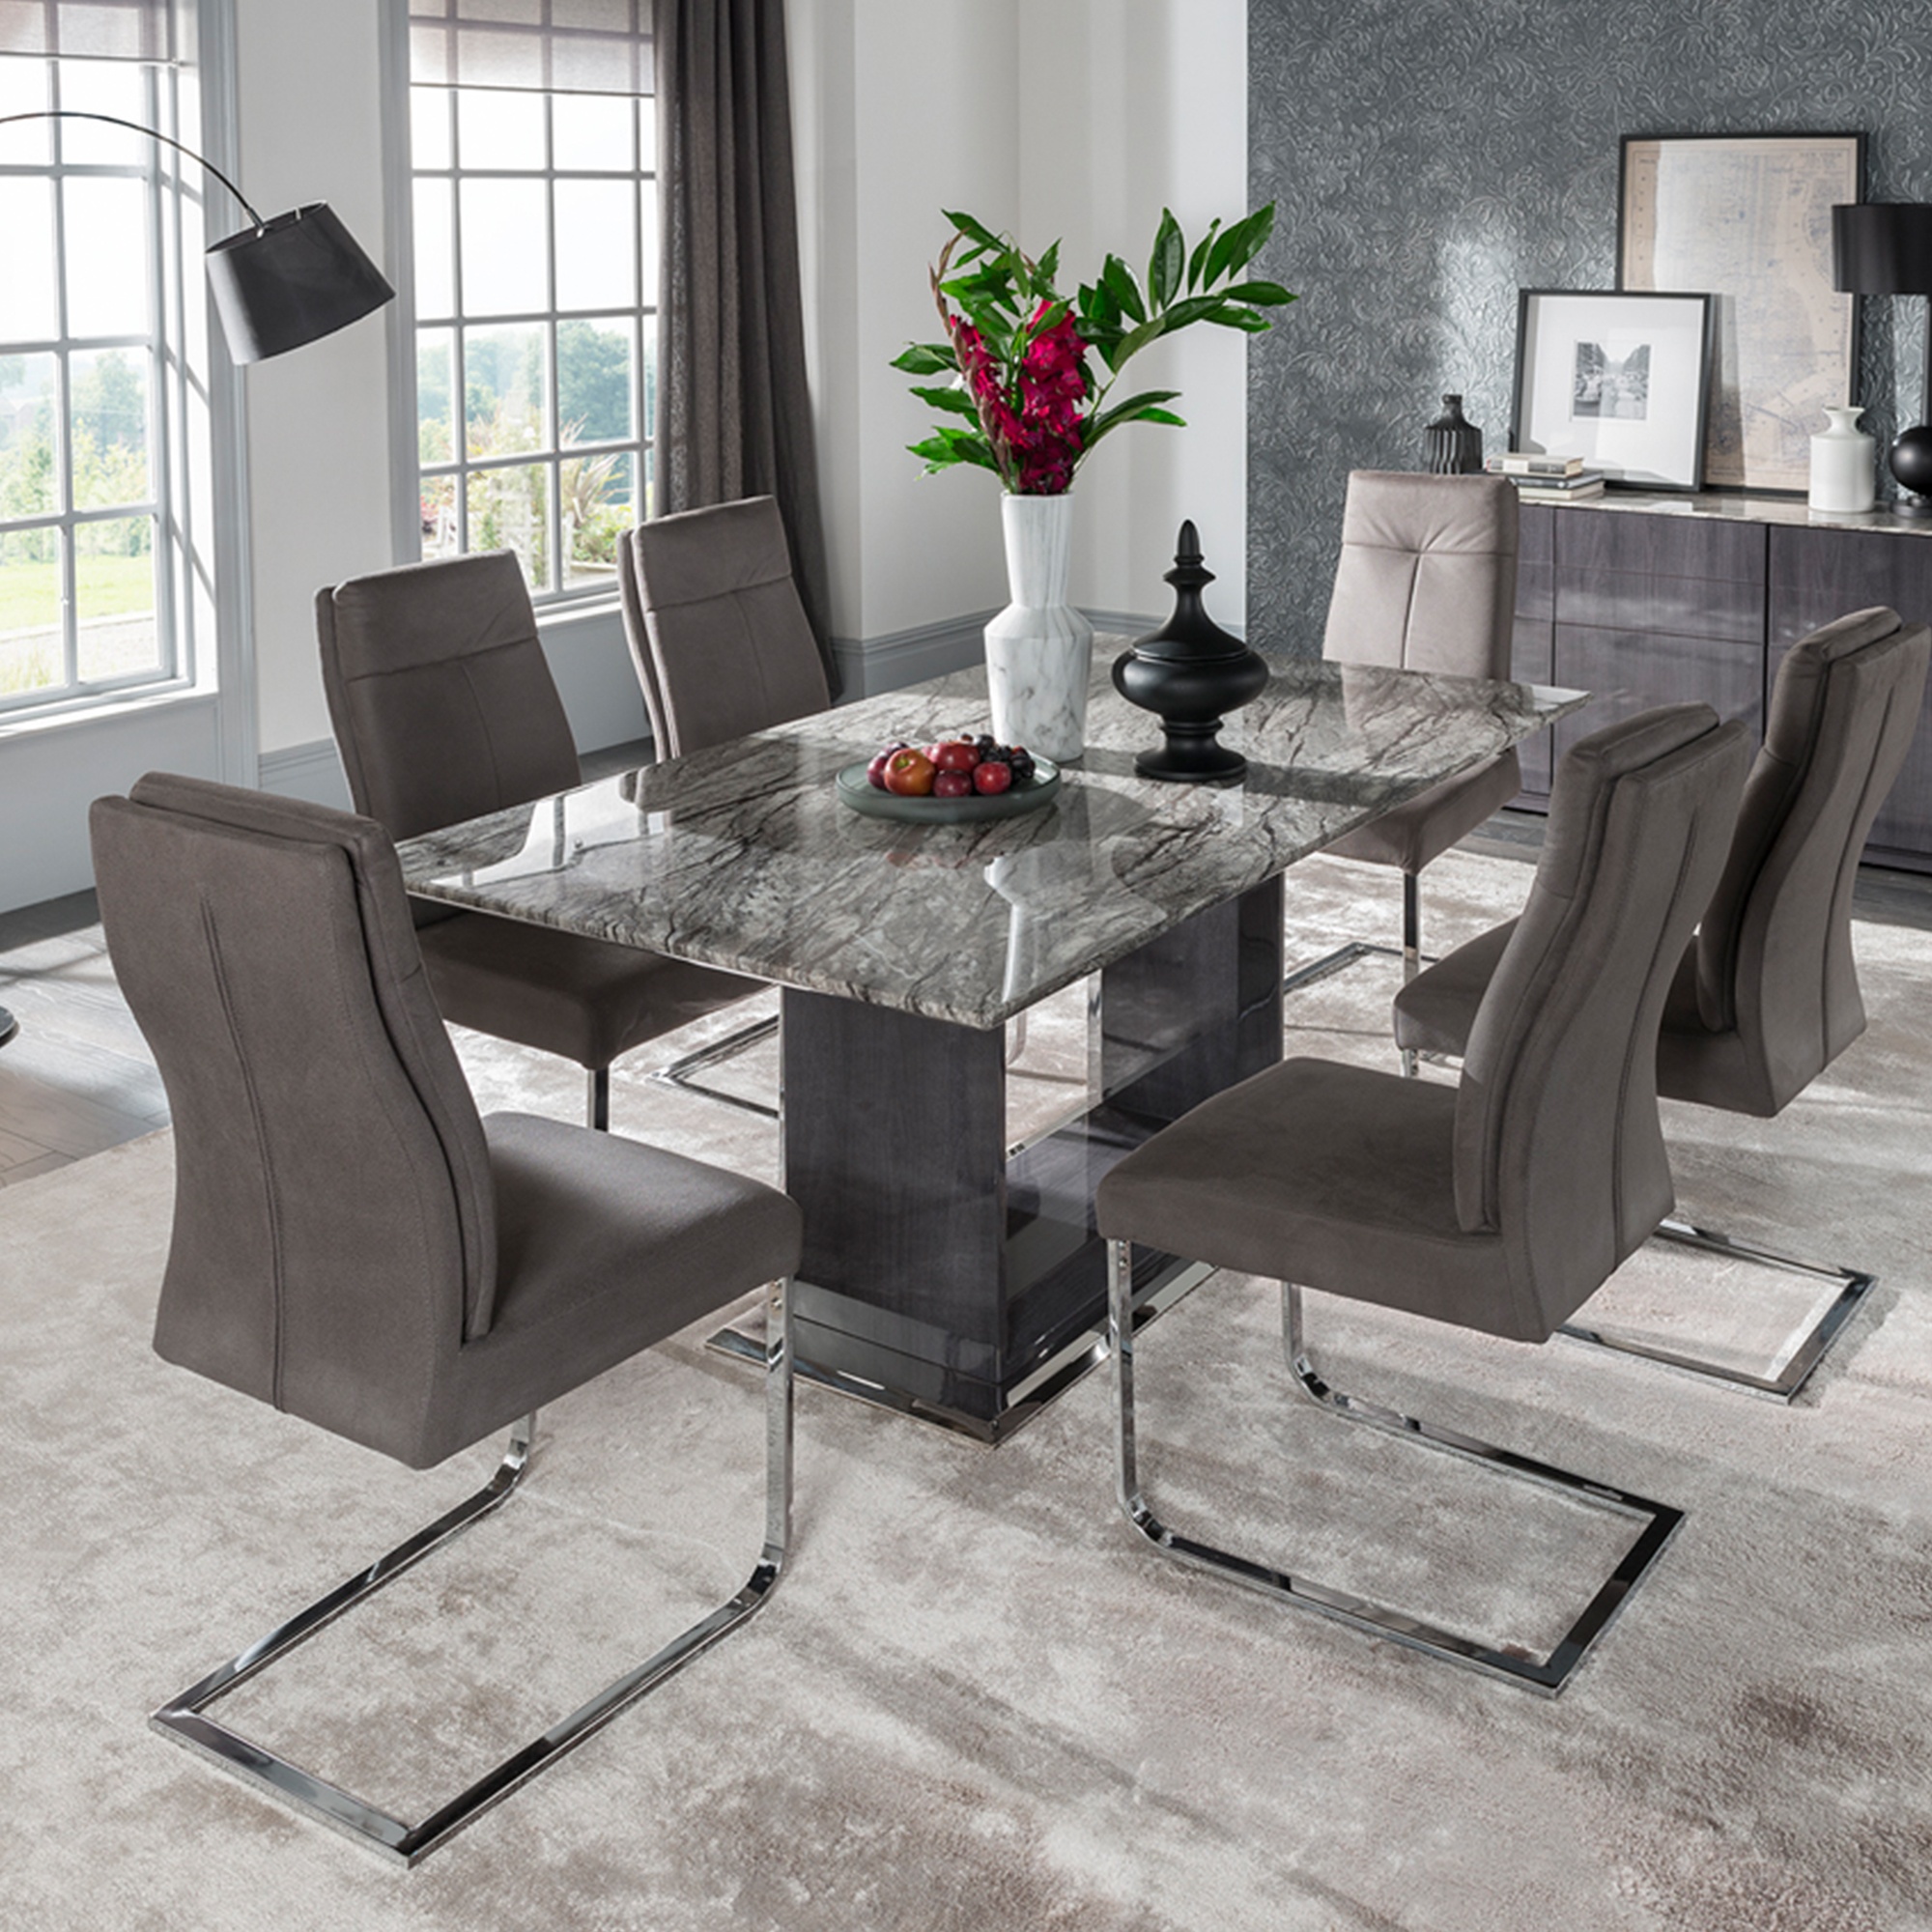 Dining Table And Chairs Latest Designs : Dining Table Glass Tables ...